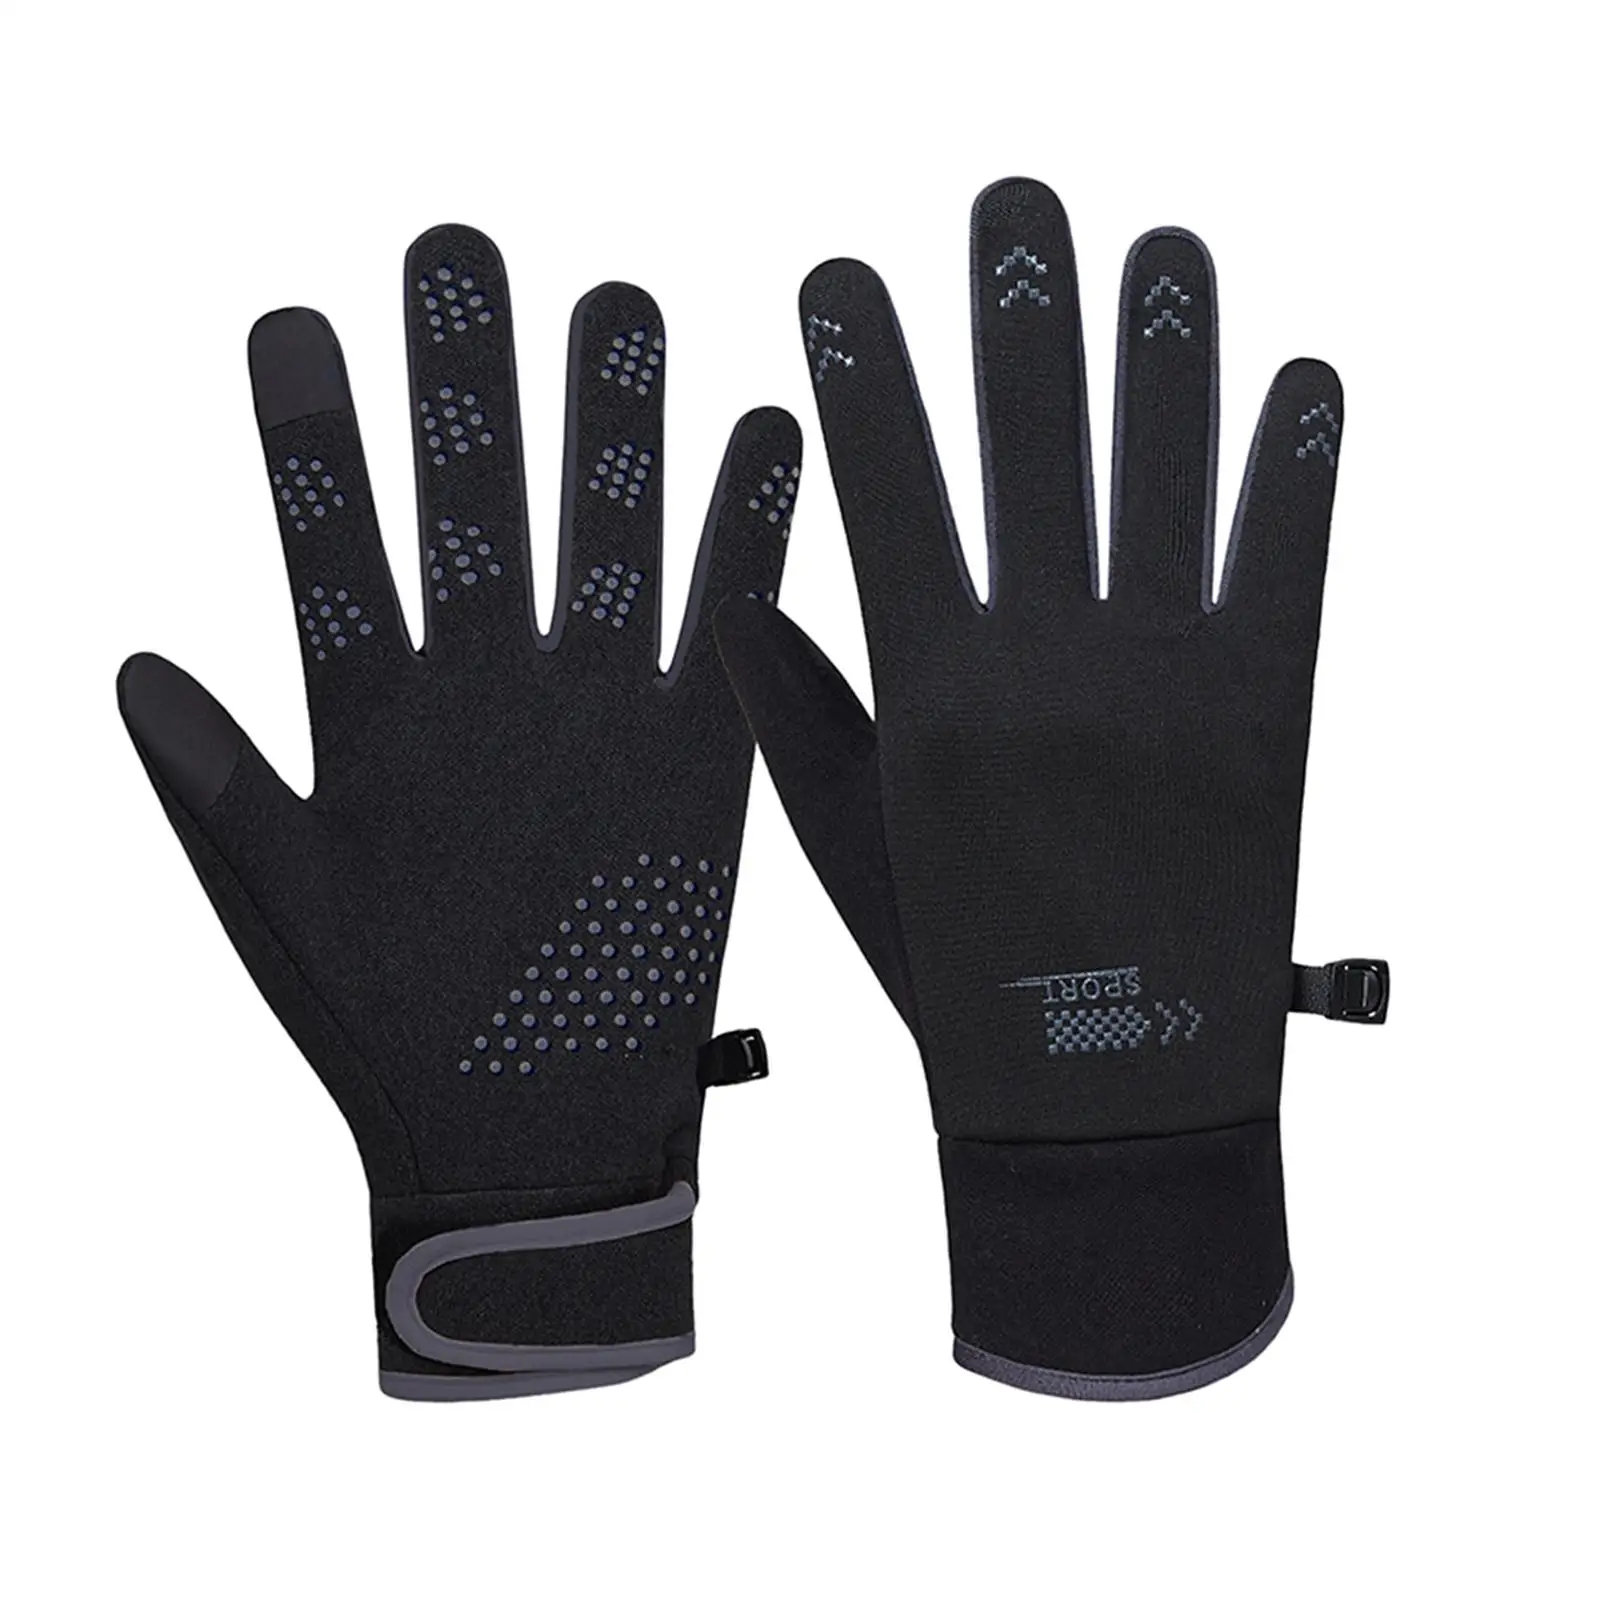 Winter Ski Gloves Touch Screen Gift Cycling Gloves for Outdoor Sports Biking